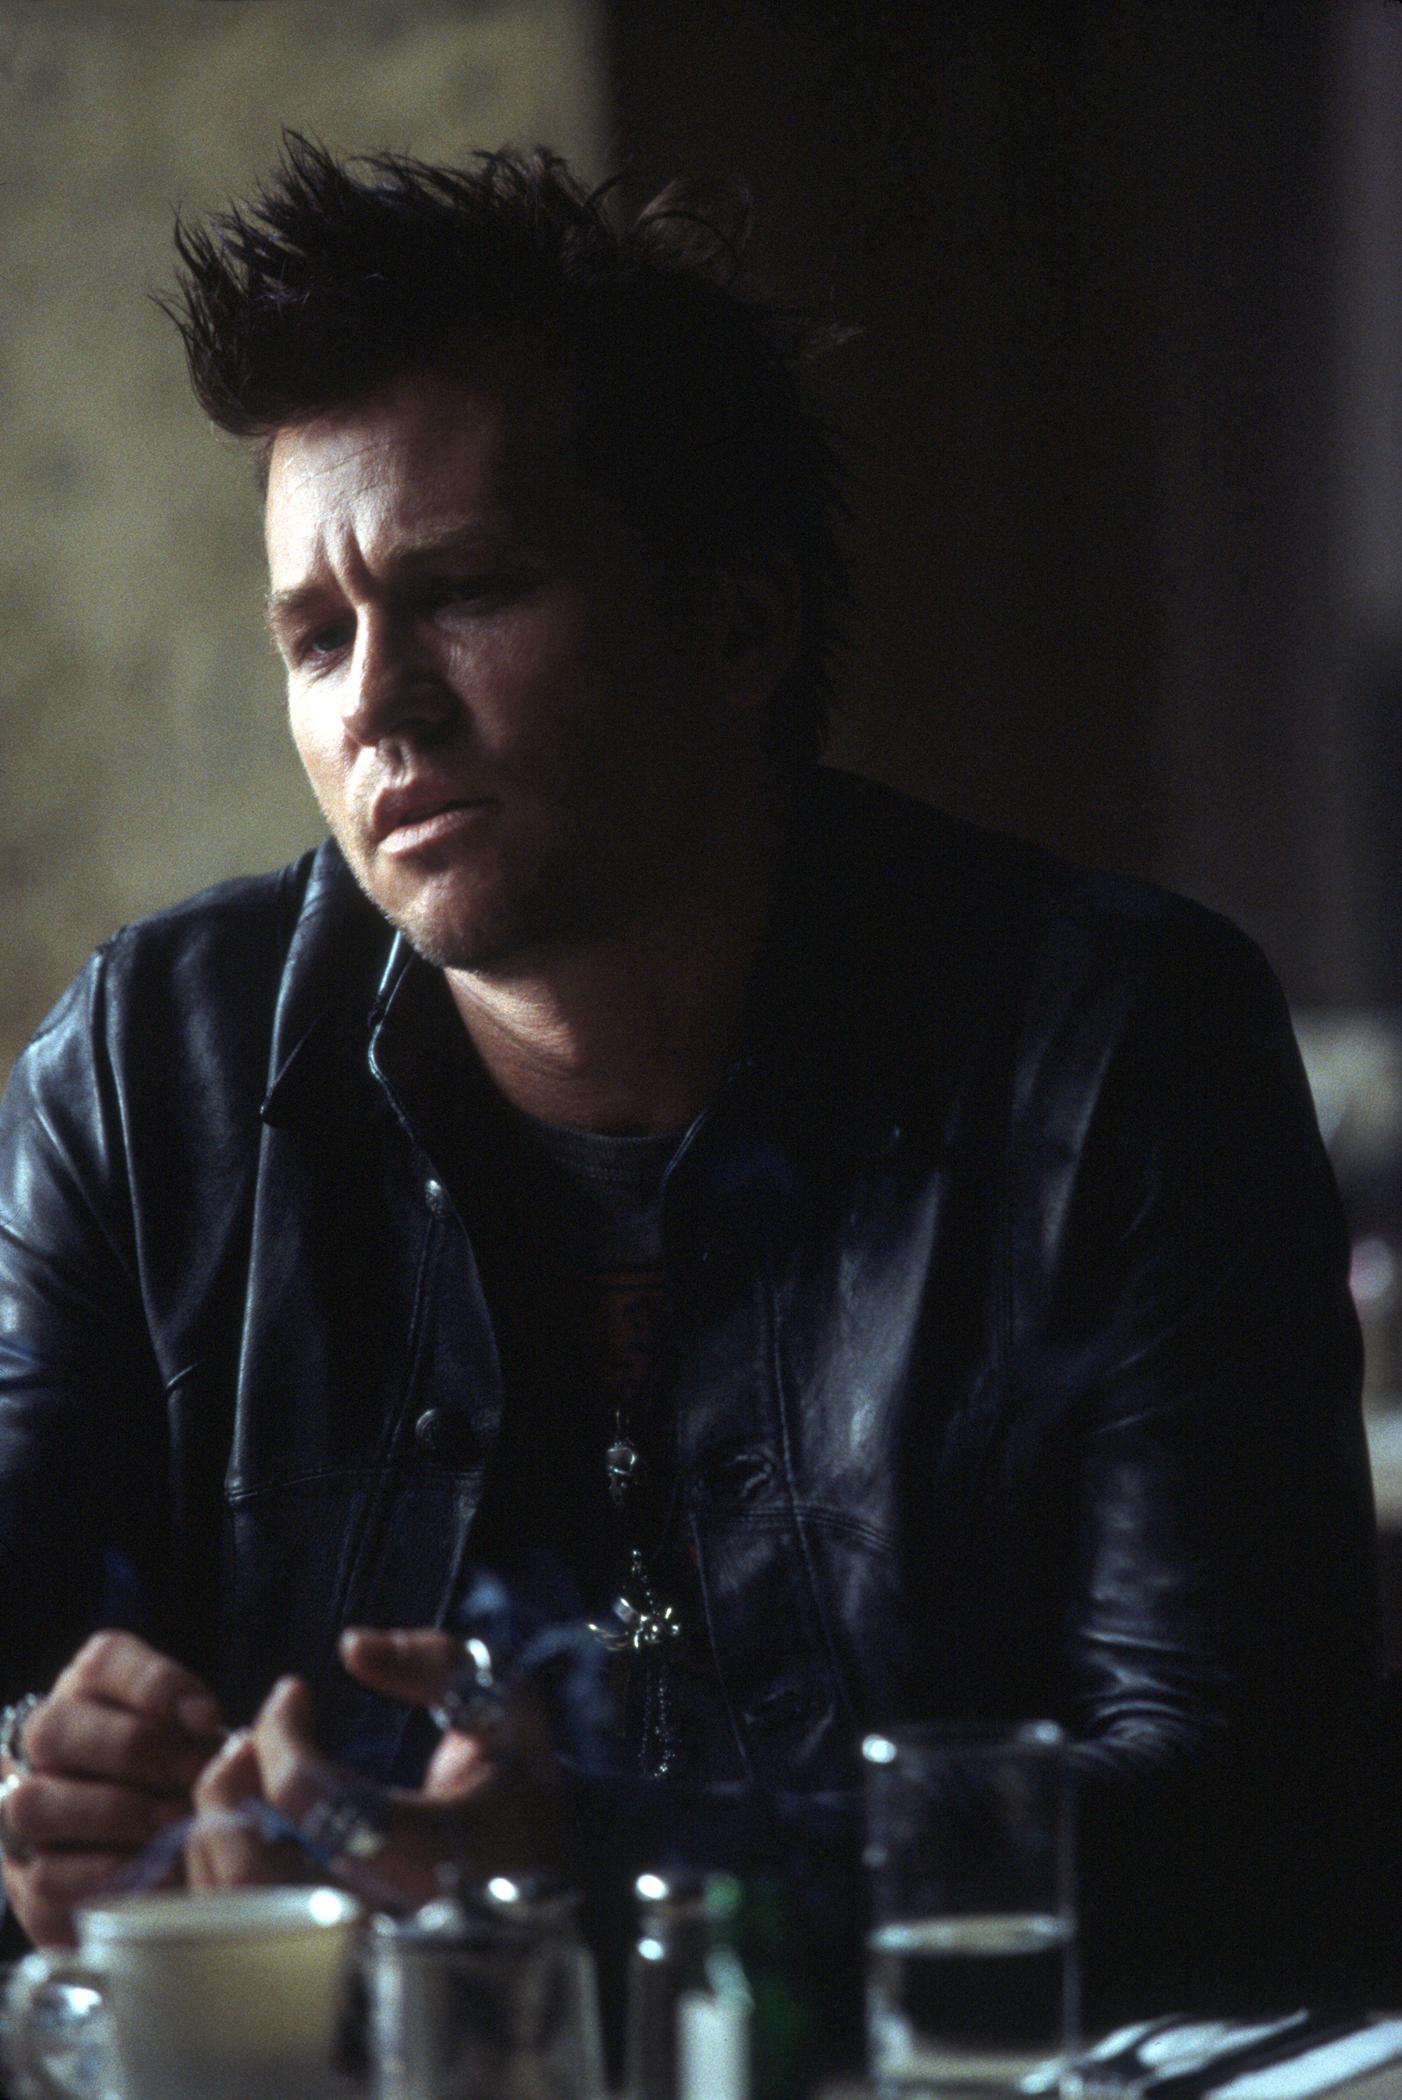 Parker (as played by Val Kilmer)